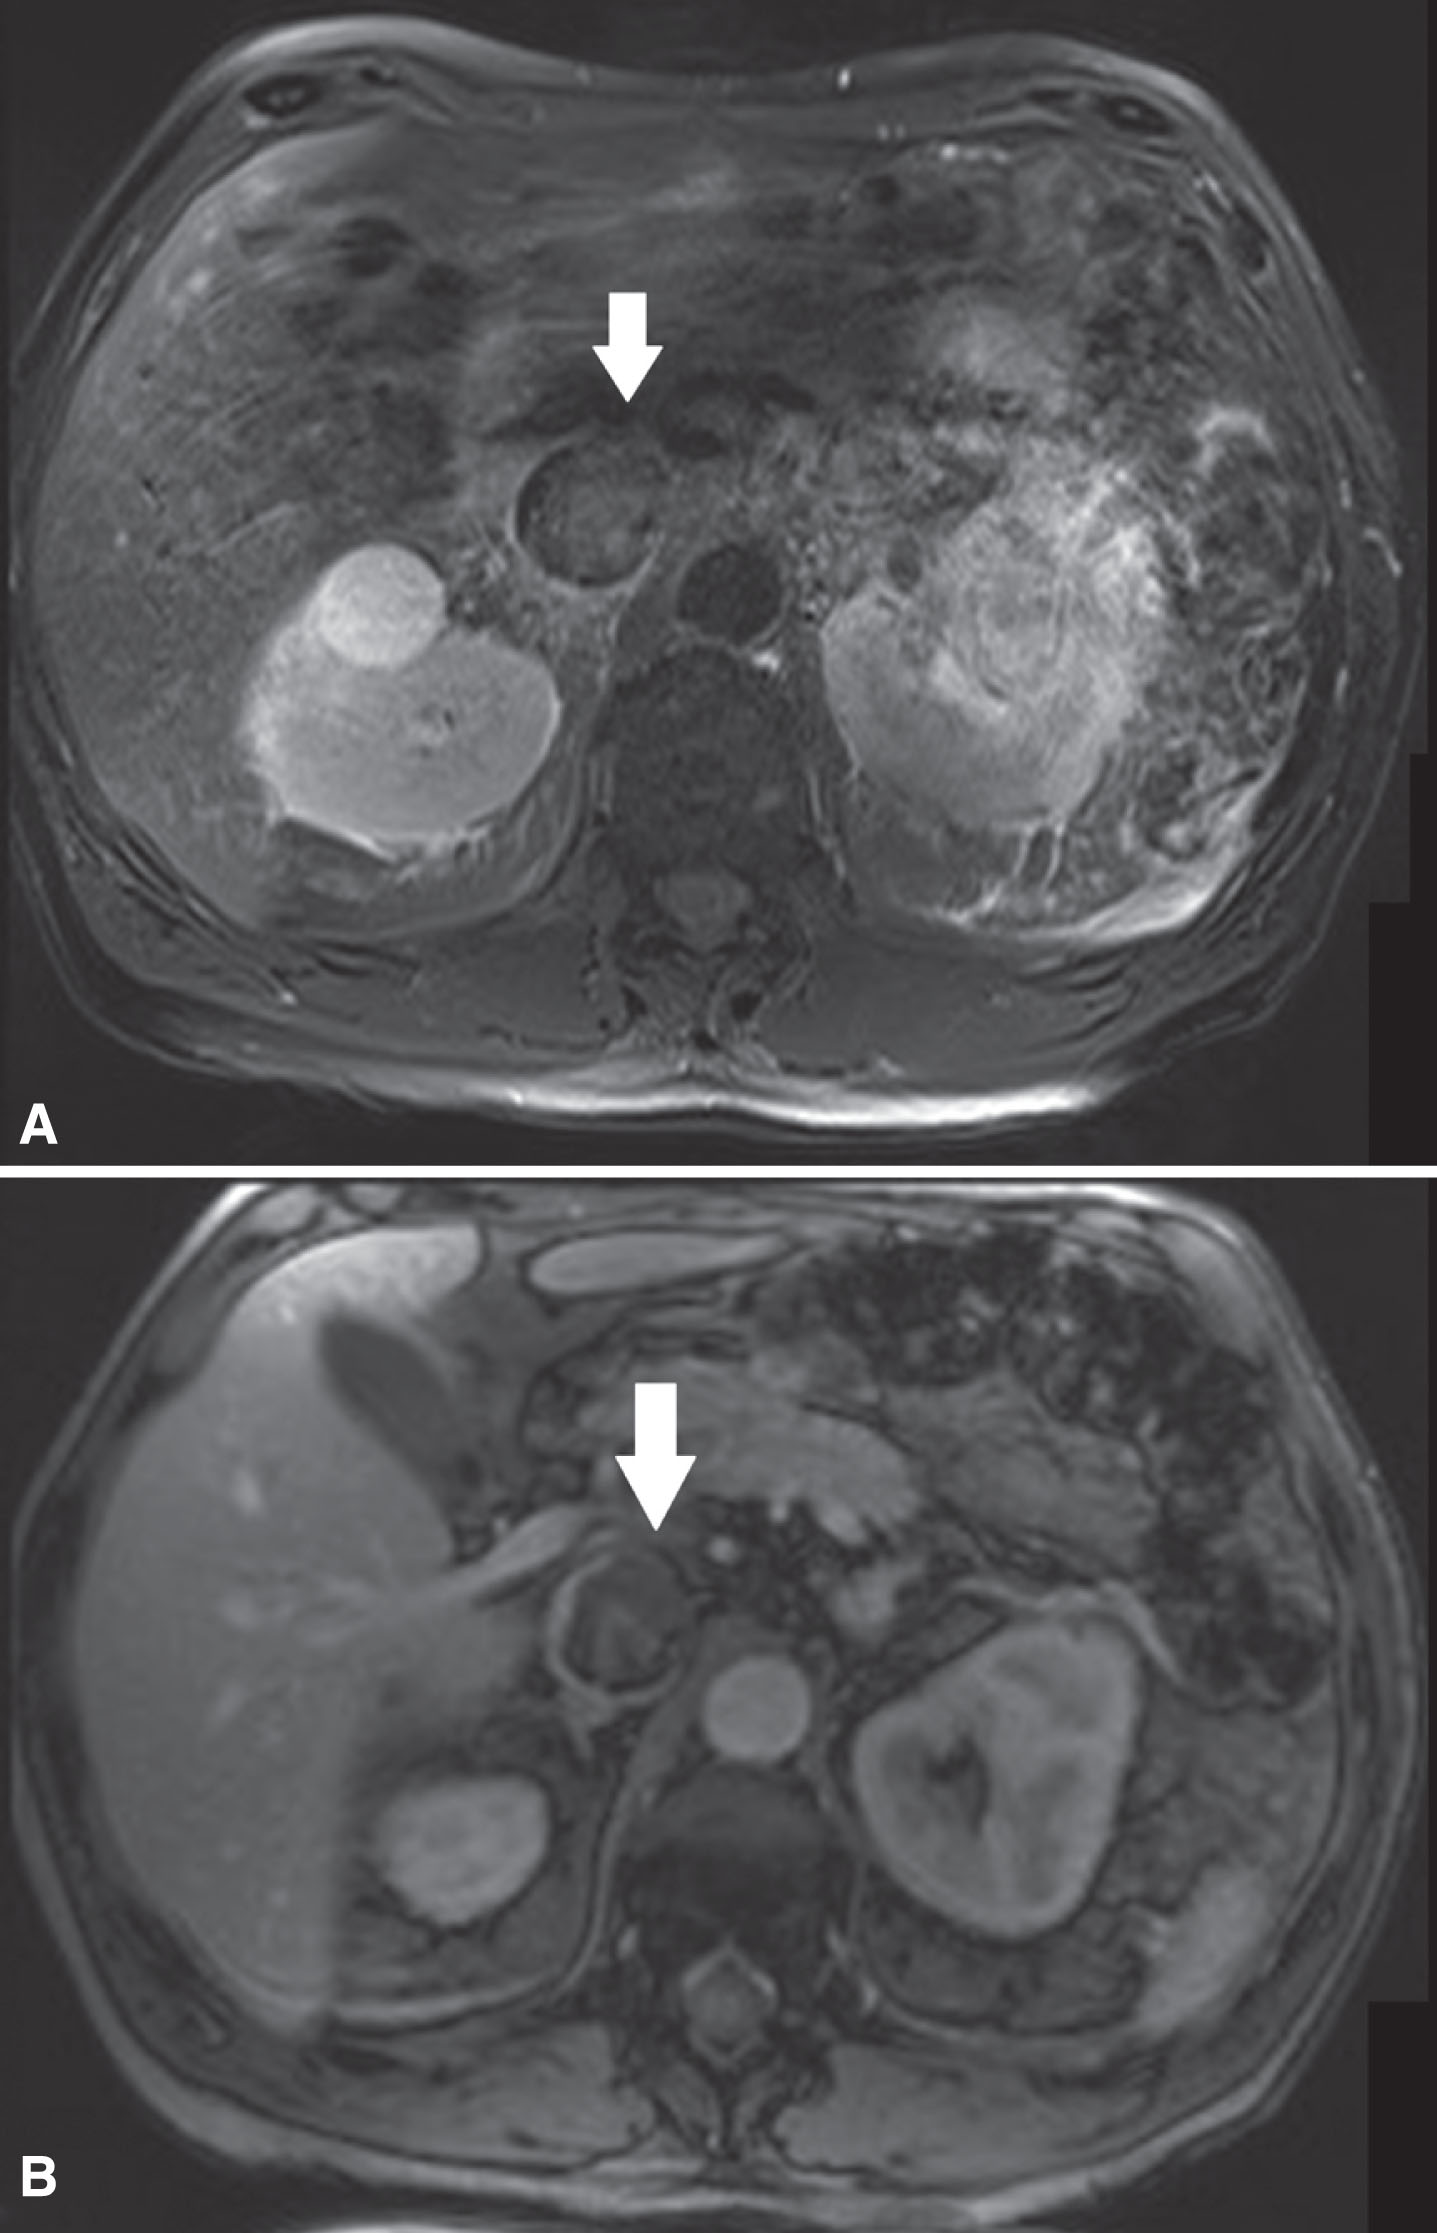 (A) In this patient with a left sided tumor and level 2 thrombus, the T2-weighted MR images showed loss of high signal intensity at the medial/ventral side of the vena cava wall (white arrow) suspicious for IVC wall invasion. (B) The corresponding DCE sequence showed evident loss of vein wall signal (white arrow) supporting the suggestion of IVC wall invasion. Surgical findings confirmed medial/ventral IVC wall invasion.